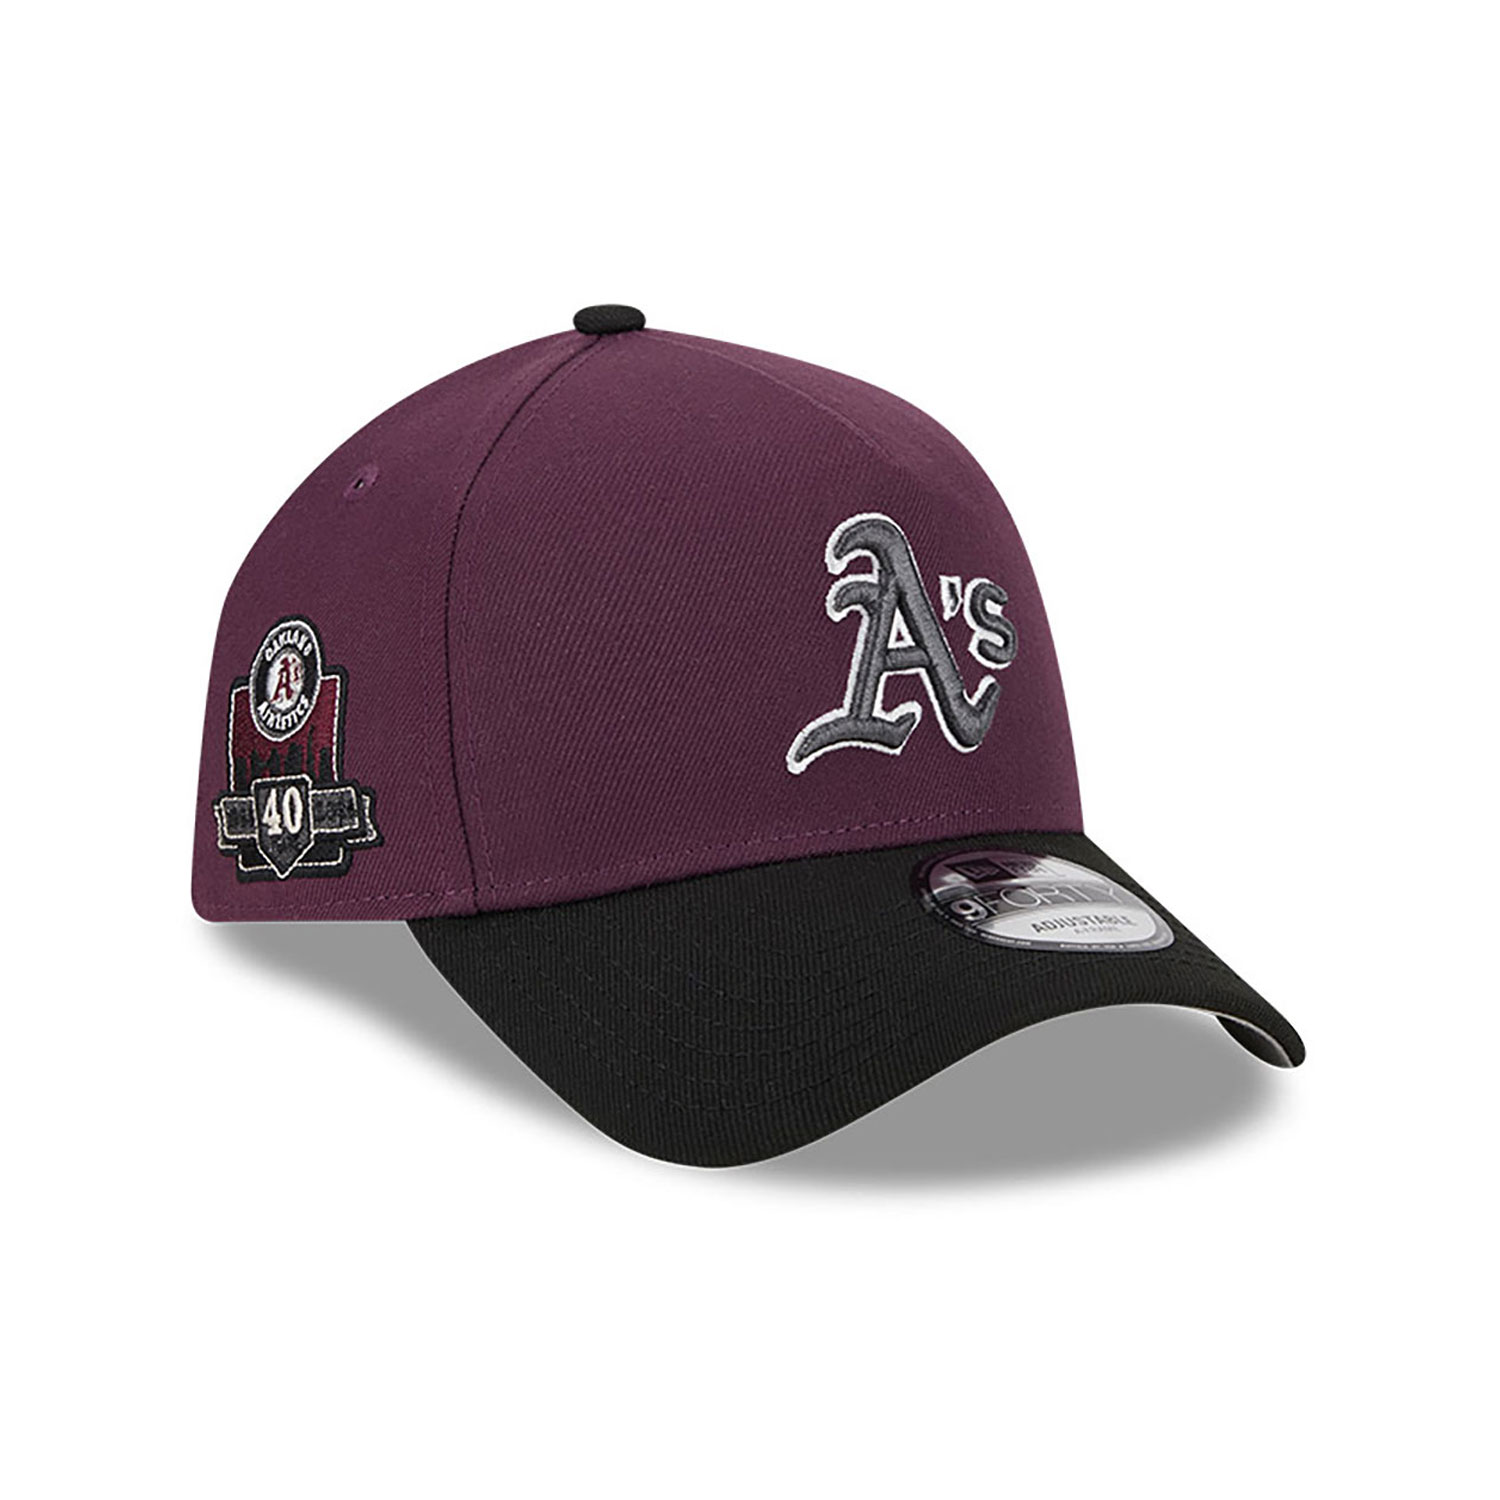 Oakland Athletics Two-Tone Dark Purple 9FORTY A-Frame Adjustable Cap